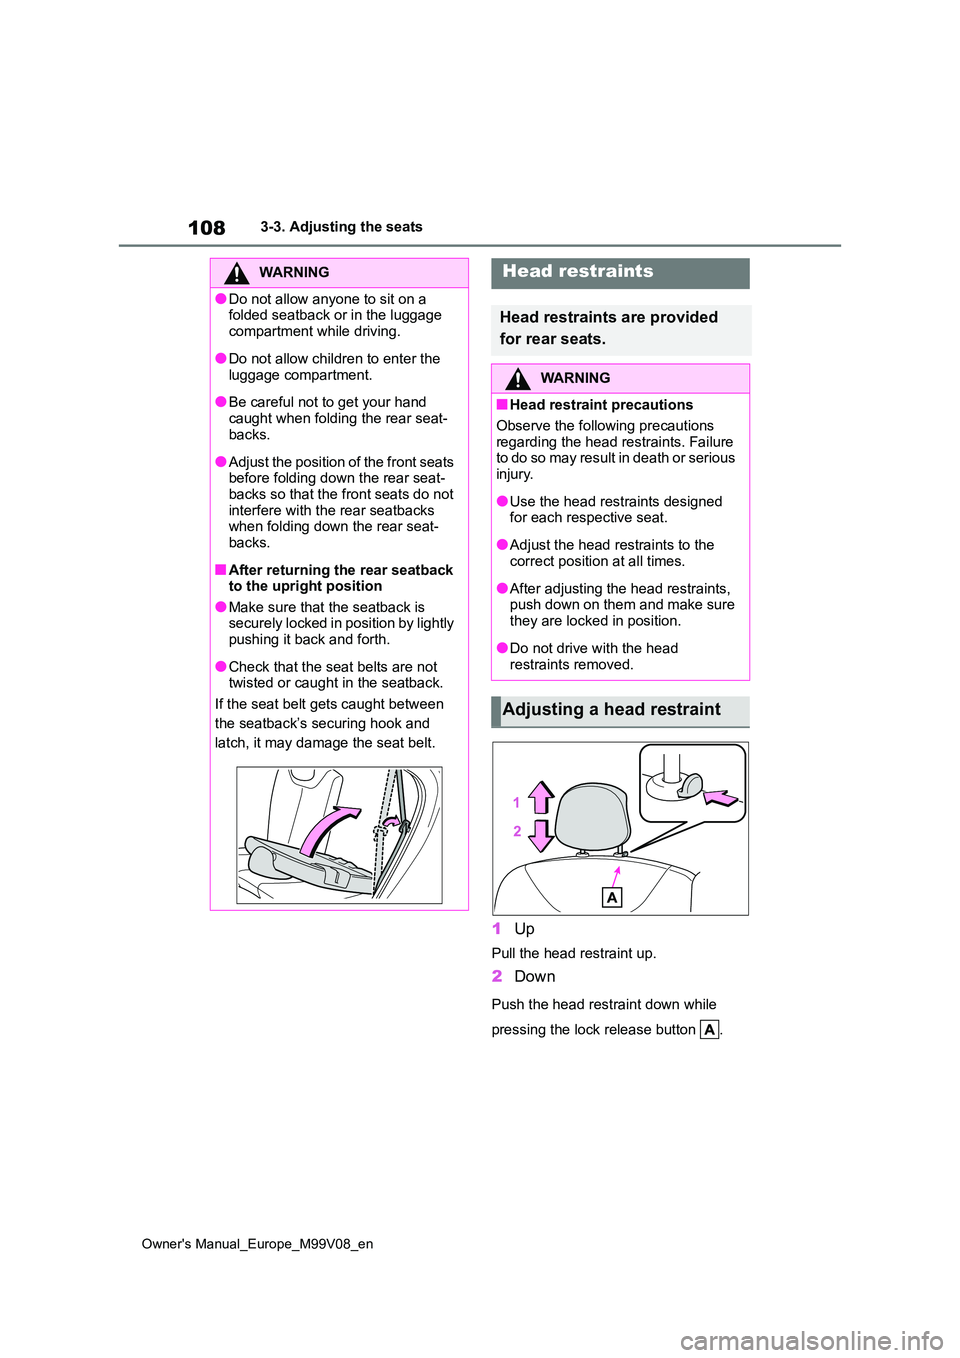 TOYOTA AYGO X 2022  Owners Manual (in English) 108
Owner's Manual_Europe_M99V08_en
3-3. Adjusting the seats
1Up
Pull the head restraint up.
2Down
Push the head restraint down while  
pressing the lock release button  .
WARNING
●Do not allow 